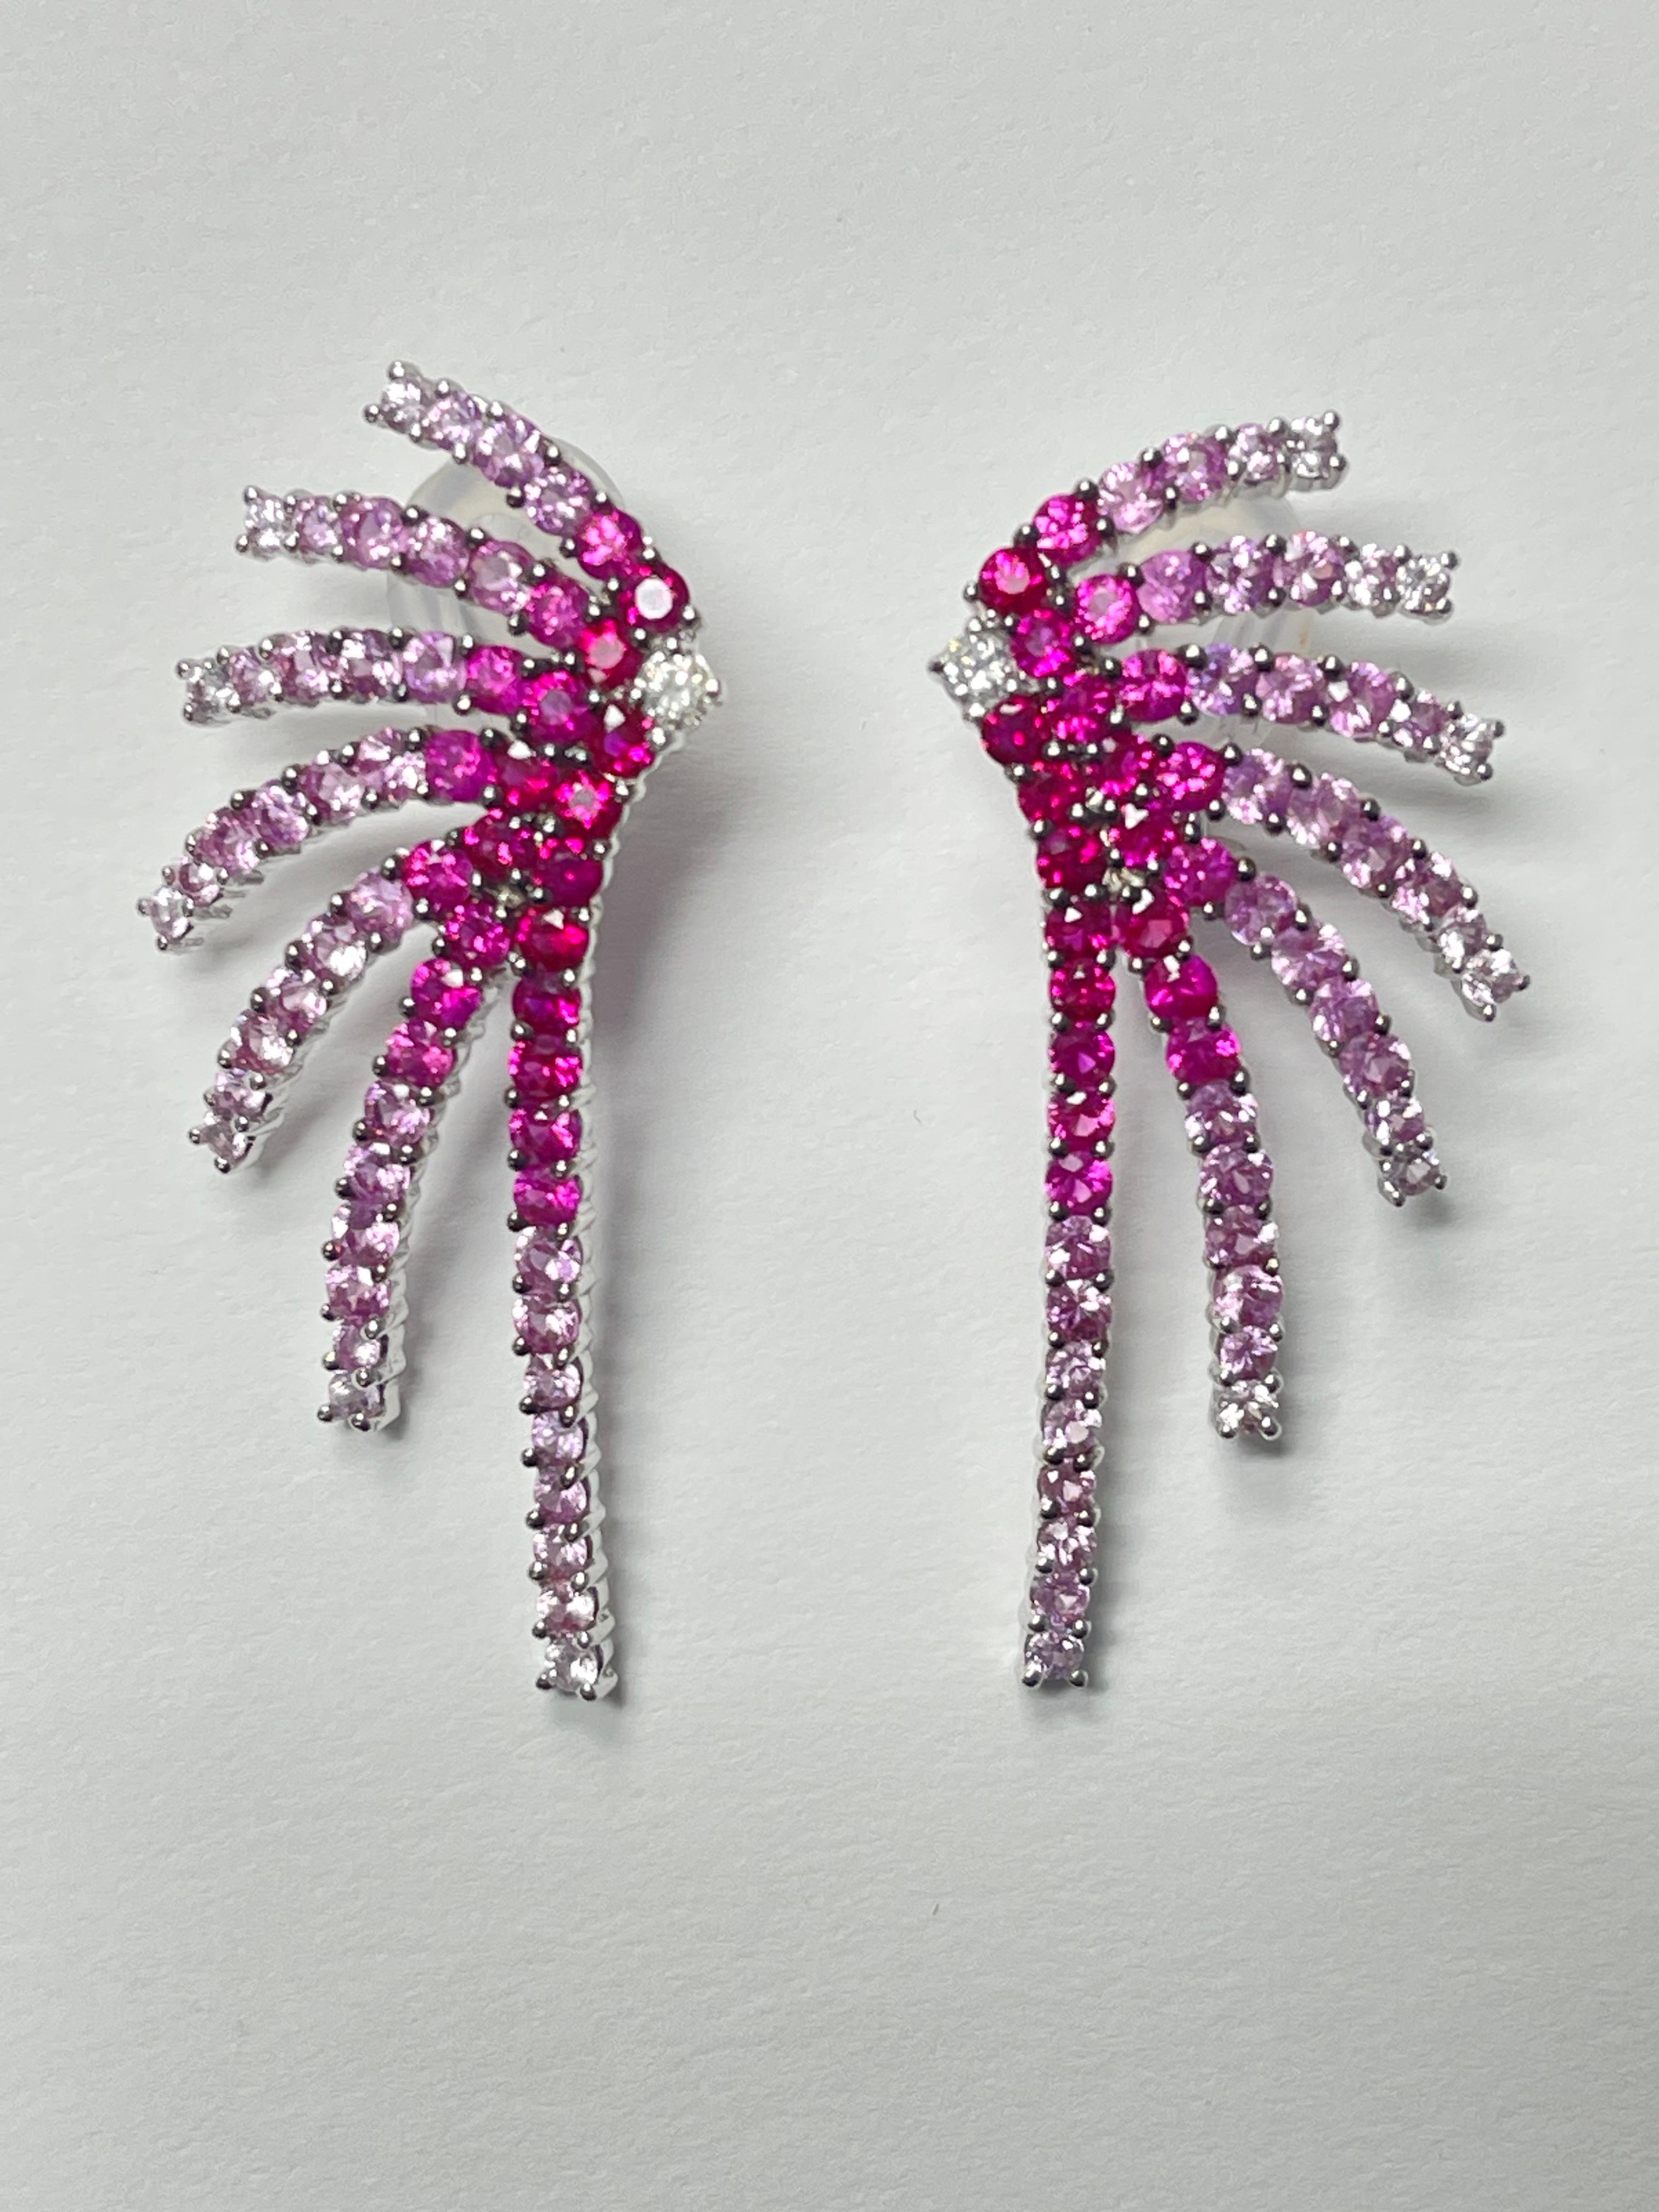 Round Cut Ruby Diamond and Pink Sapphire Fire works Earrings in 18k White Gold. For Sale